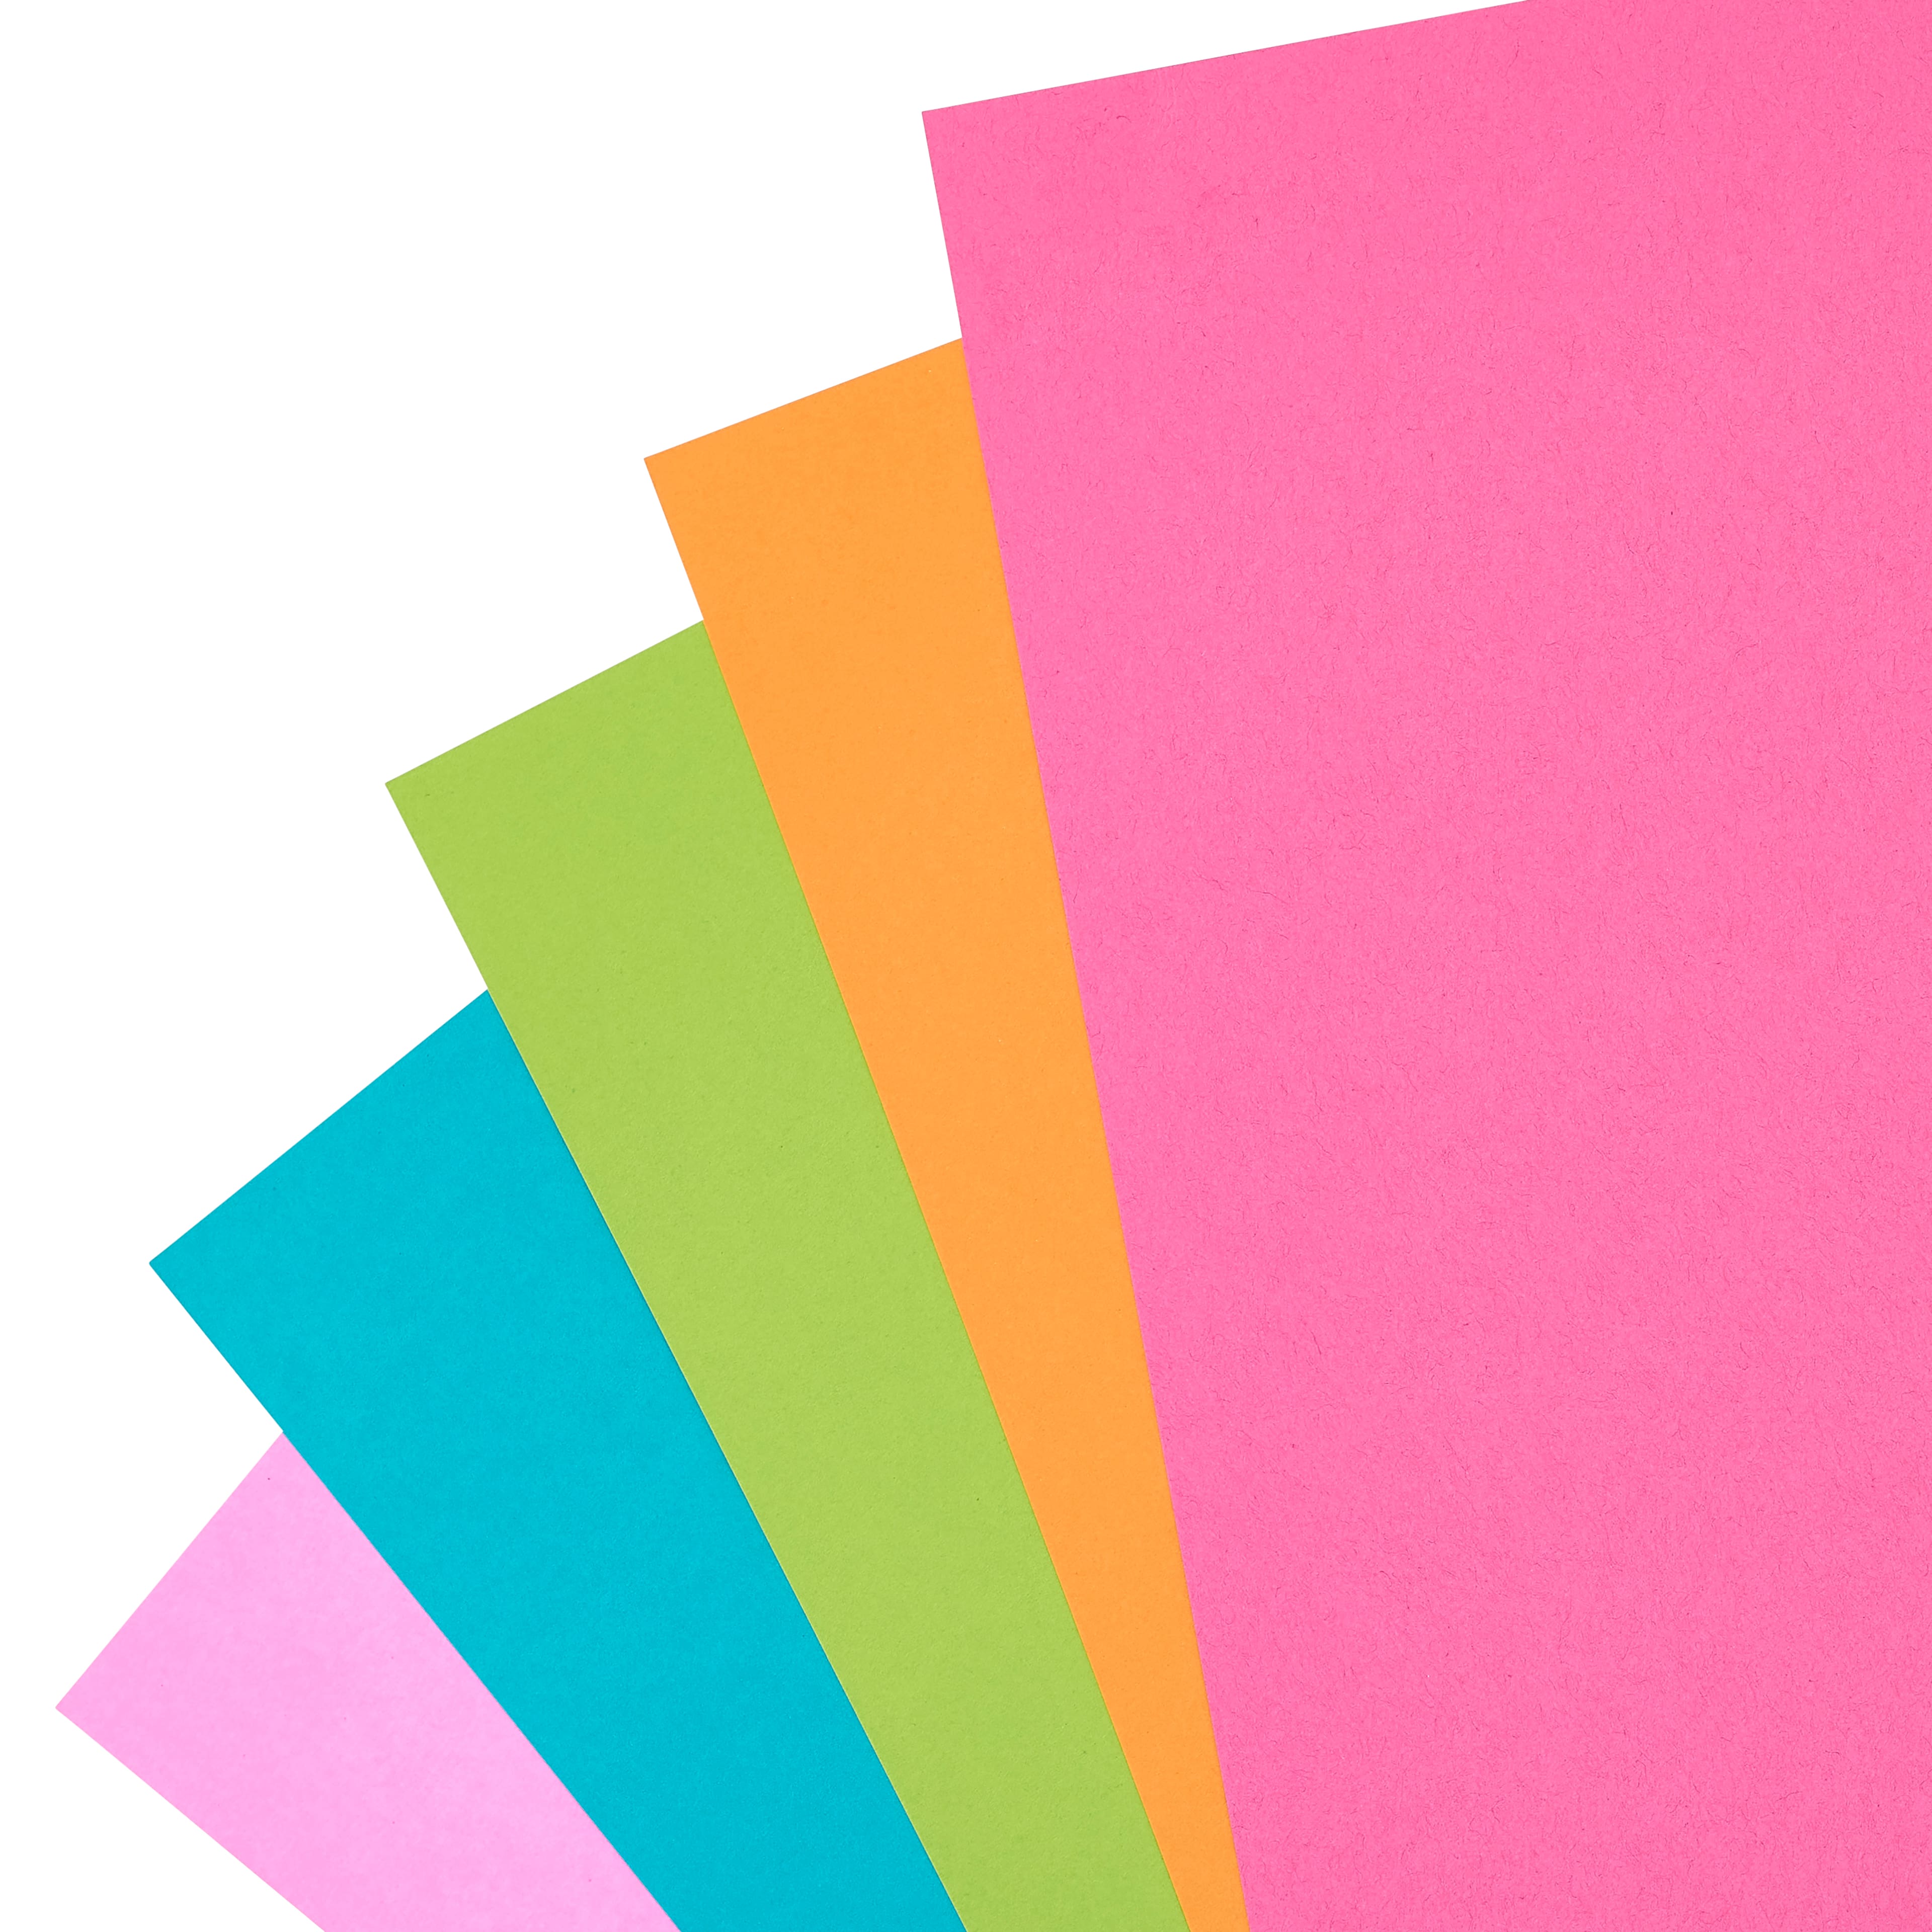  Neon Bright Colors Printable Cardstock Paper 8 1/2x11 -  Inkjet/Laser - 4 Colors - 50 Sheets : Arts, Crafts & Sewing